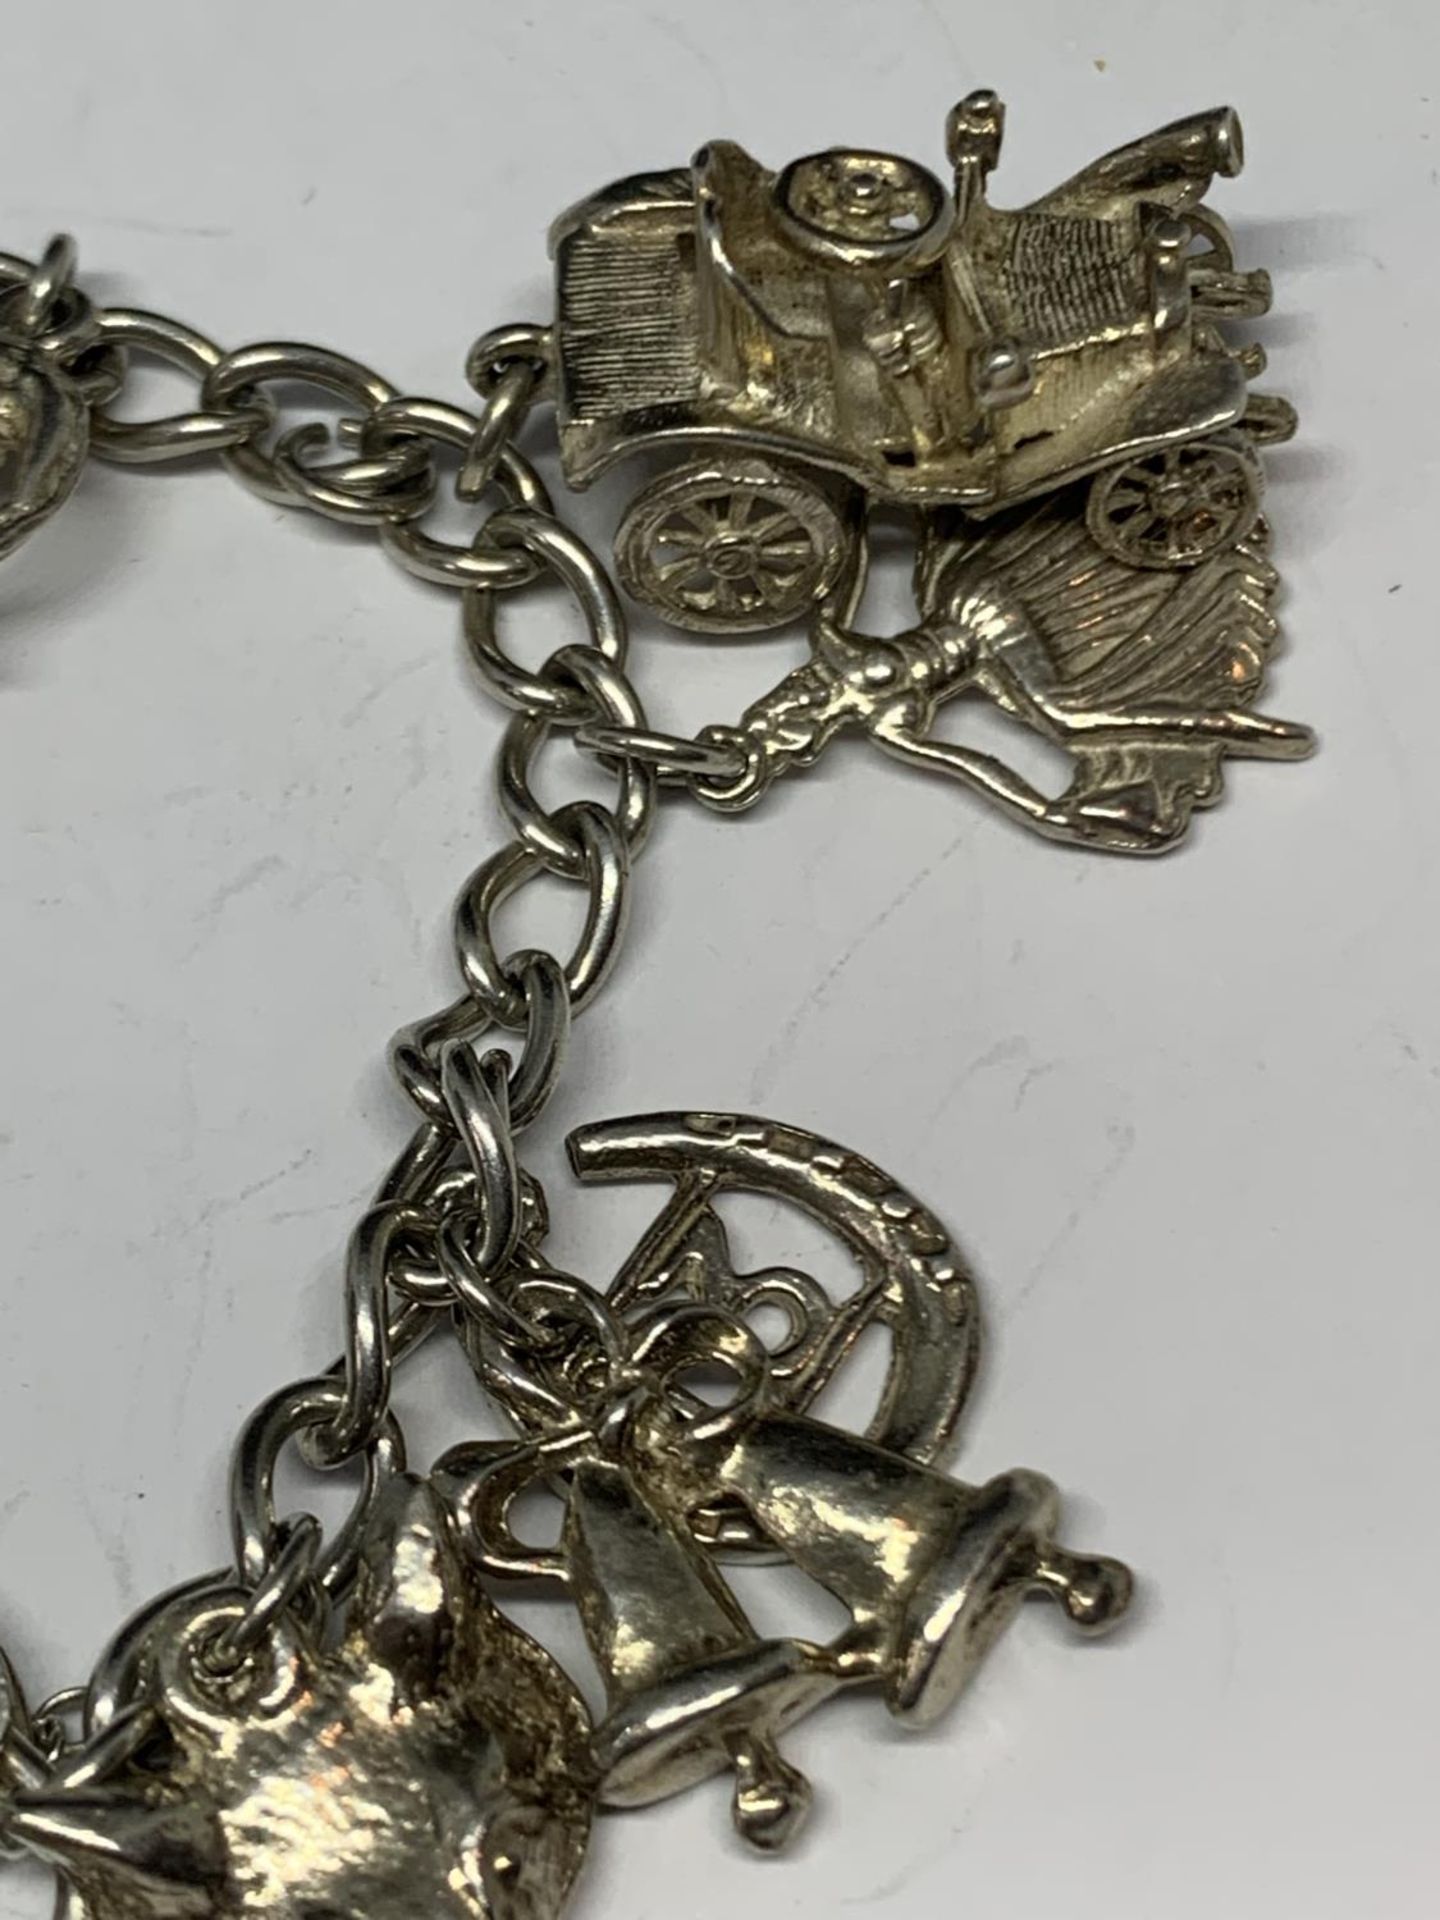 A SILVER BRACELET WITH THIRTEEN CHARMS - Image 3 of 4